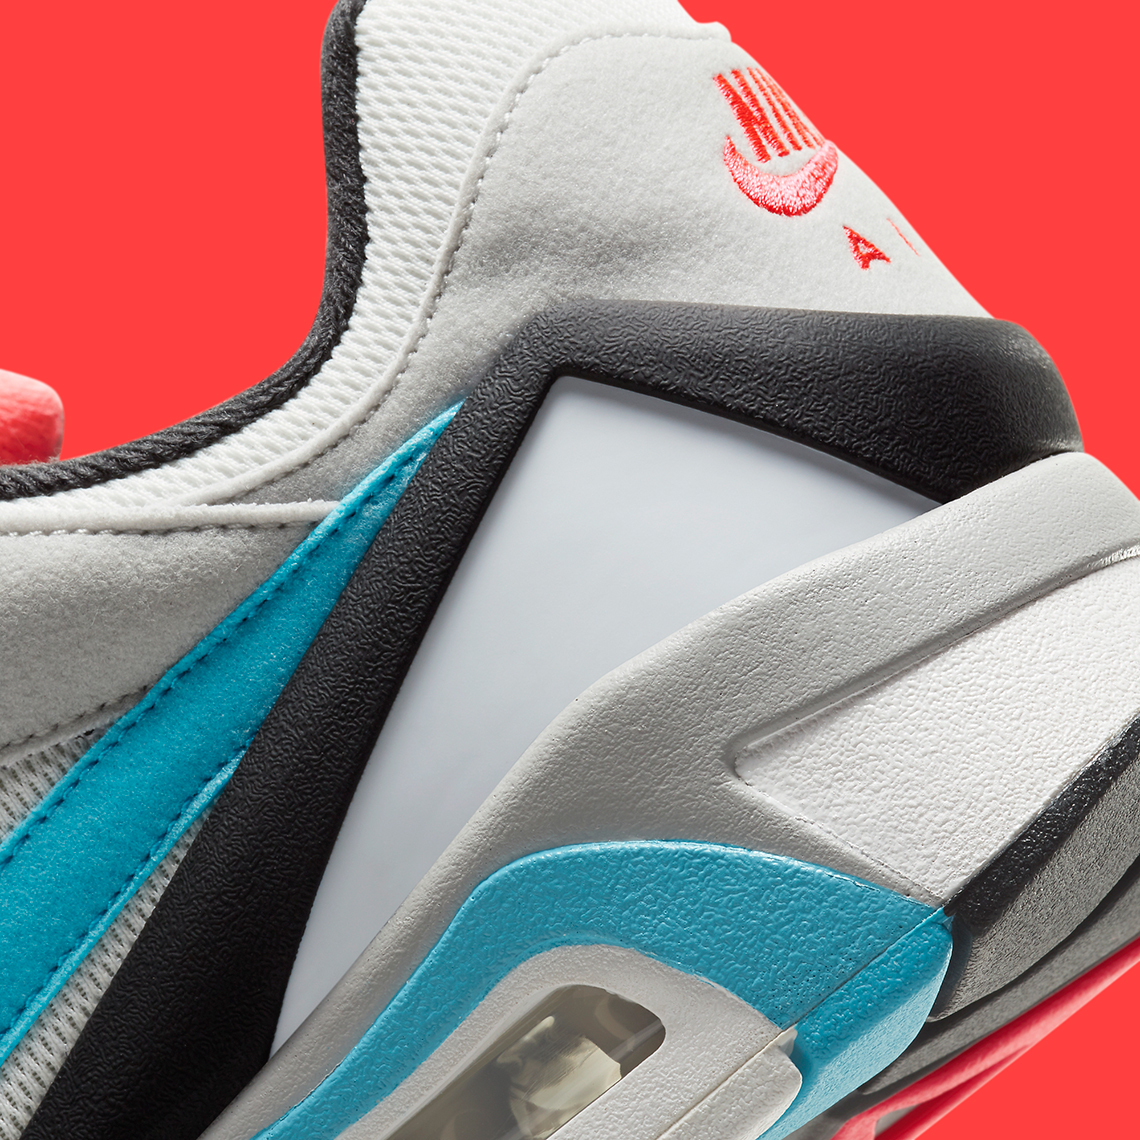 Nike Air Structure Triax 91 Og White Neo Teal Black Infrared Nike Air Structure Triax 91 Og White Neo Teal Black Infrared Cv3492 100 5